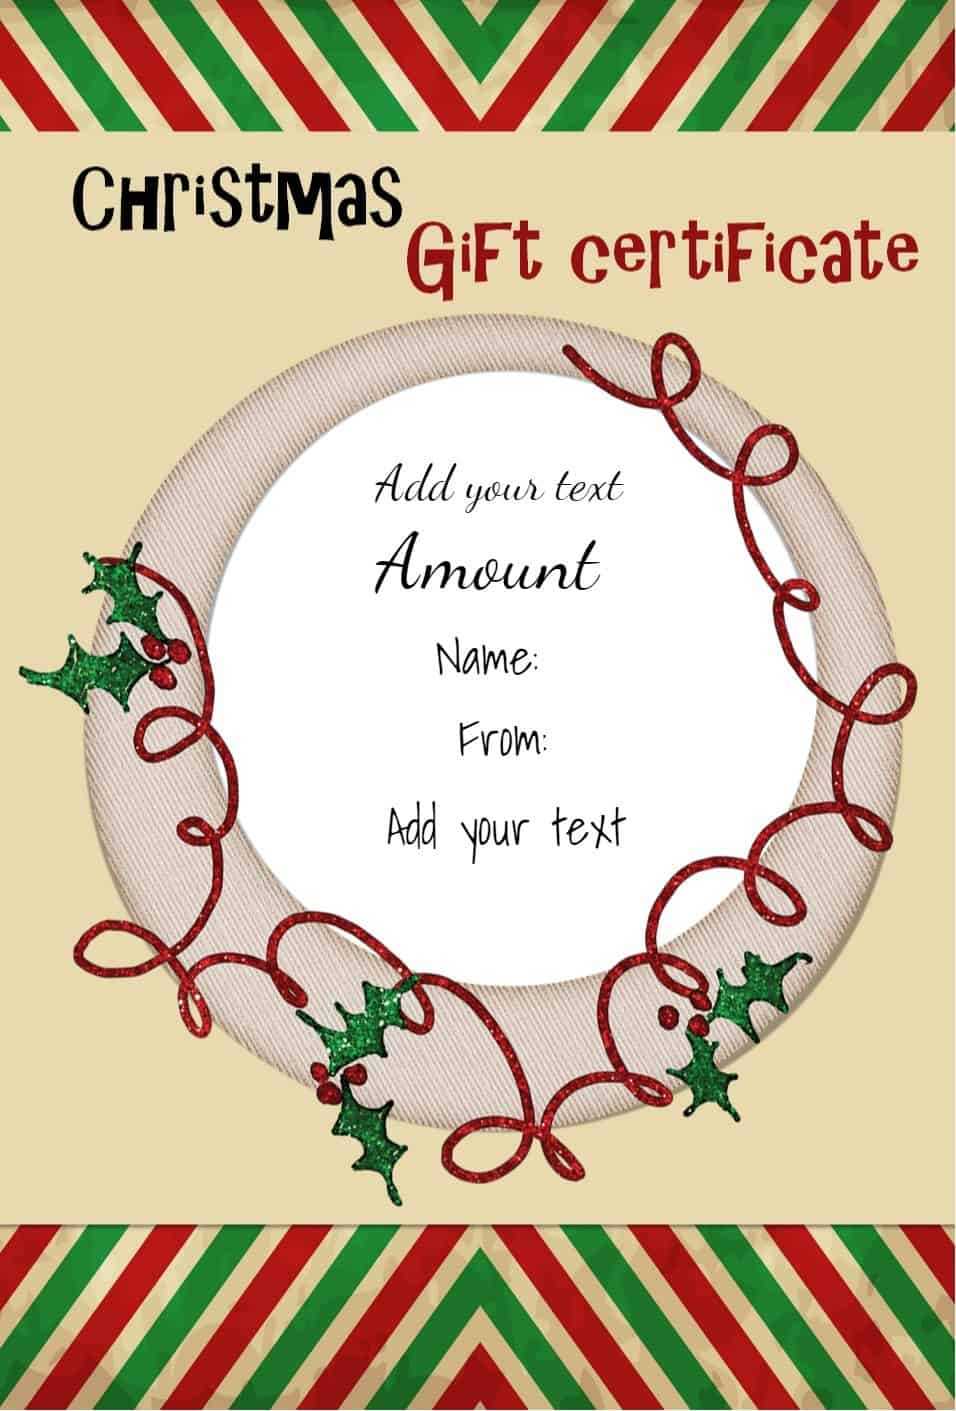 Free Christmas Gift Certificate Template | Customize Online Pertaining To Christmas Gift Certificate Template Free Download